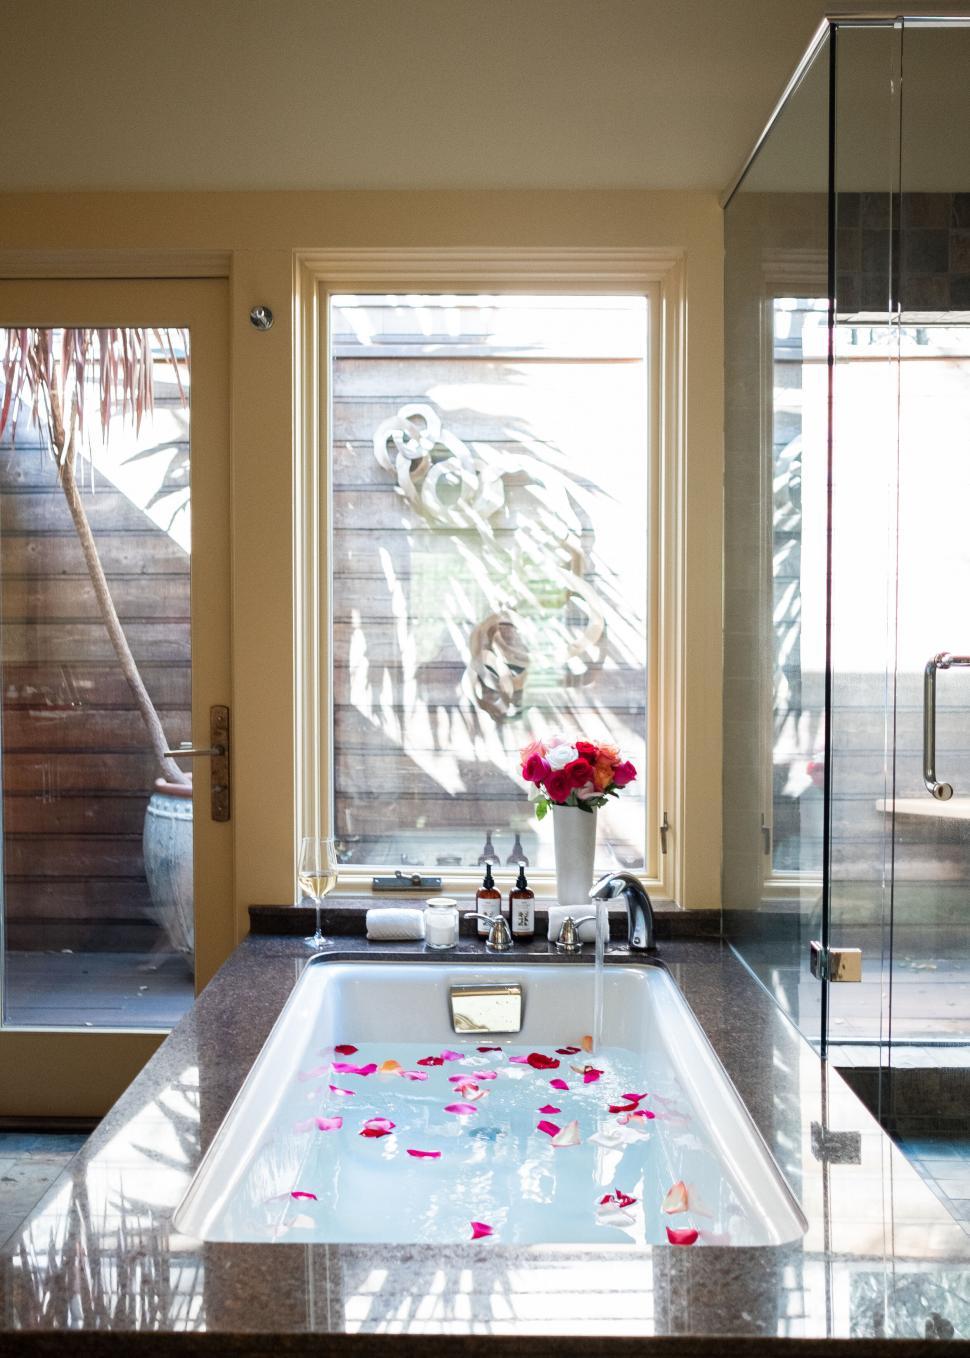 Free Image of Bathroom with rose petals in a tub 